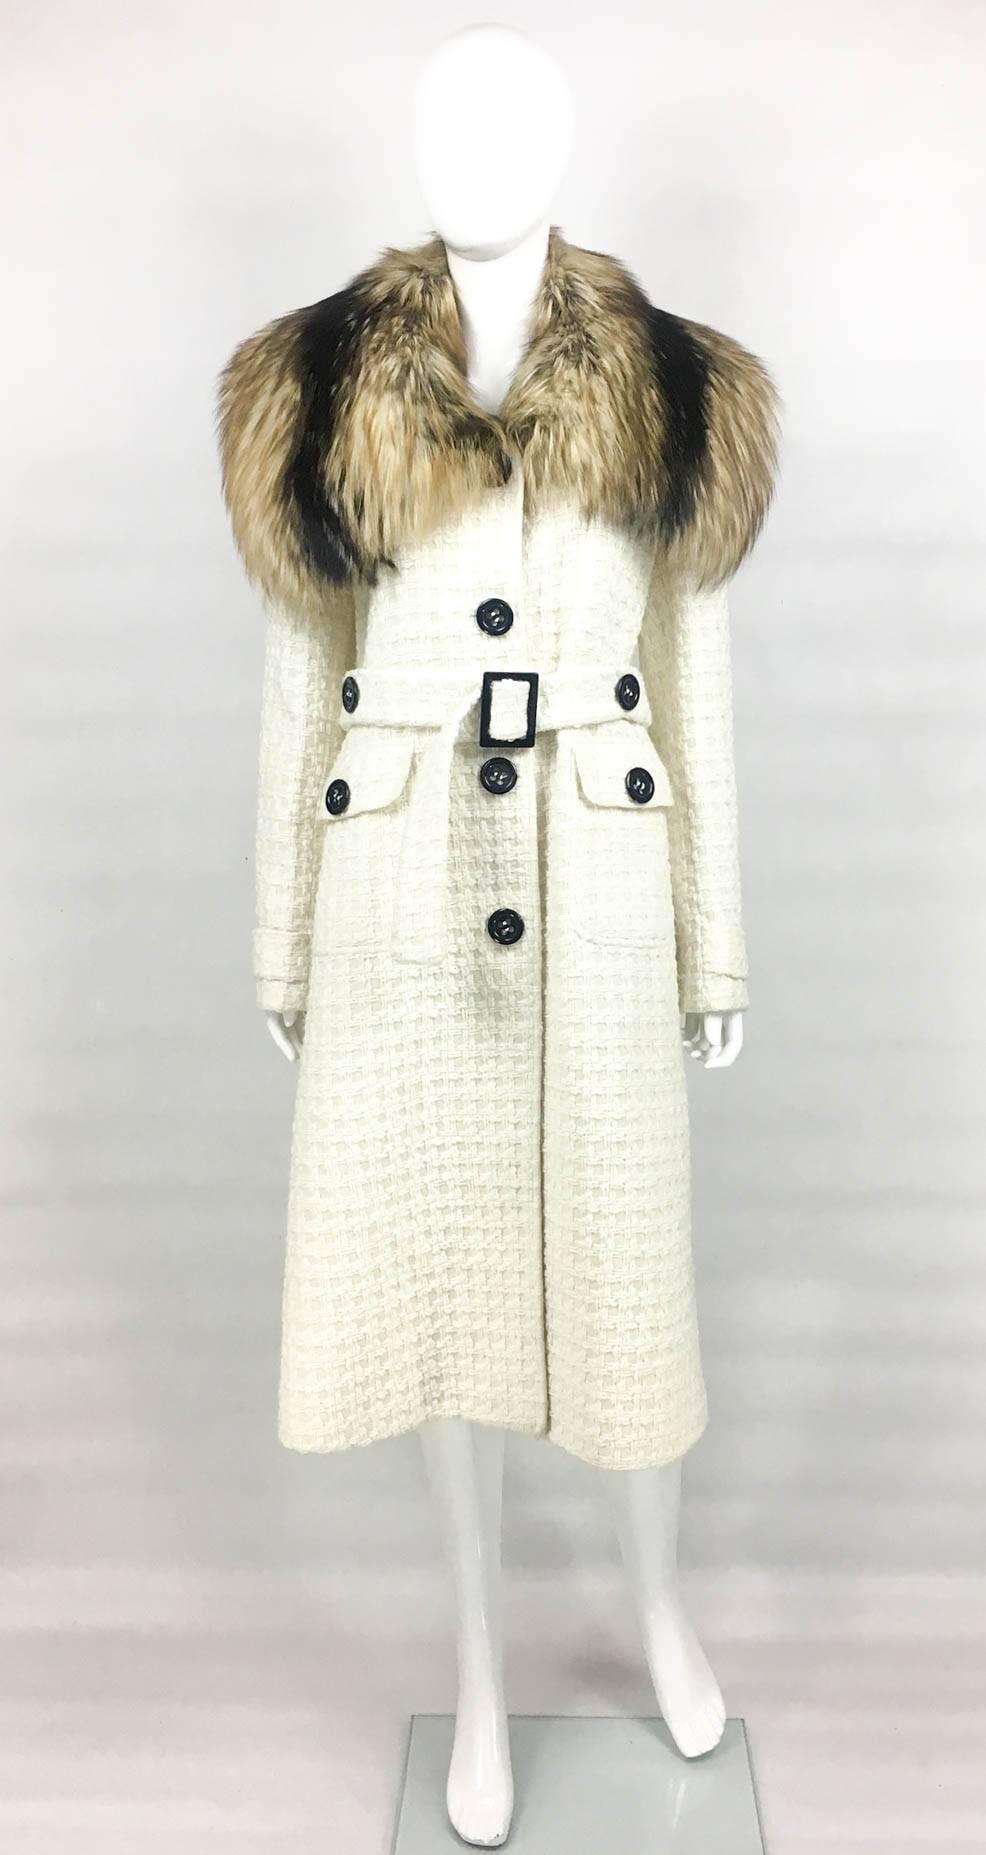 Beautiful Dolce & Gabbana Fur Collar Coat. This fabulous wool-blend off-white coat by Dolce & Gabbana features a dramatic fox-fur collar. The coat is mid-length and texturised. It has 4 buttons down the front, 2 pockets with buttons and a belt in